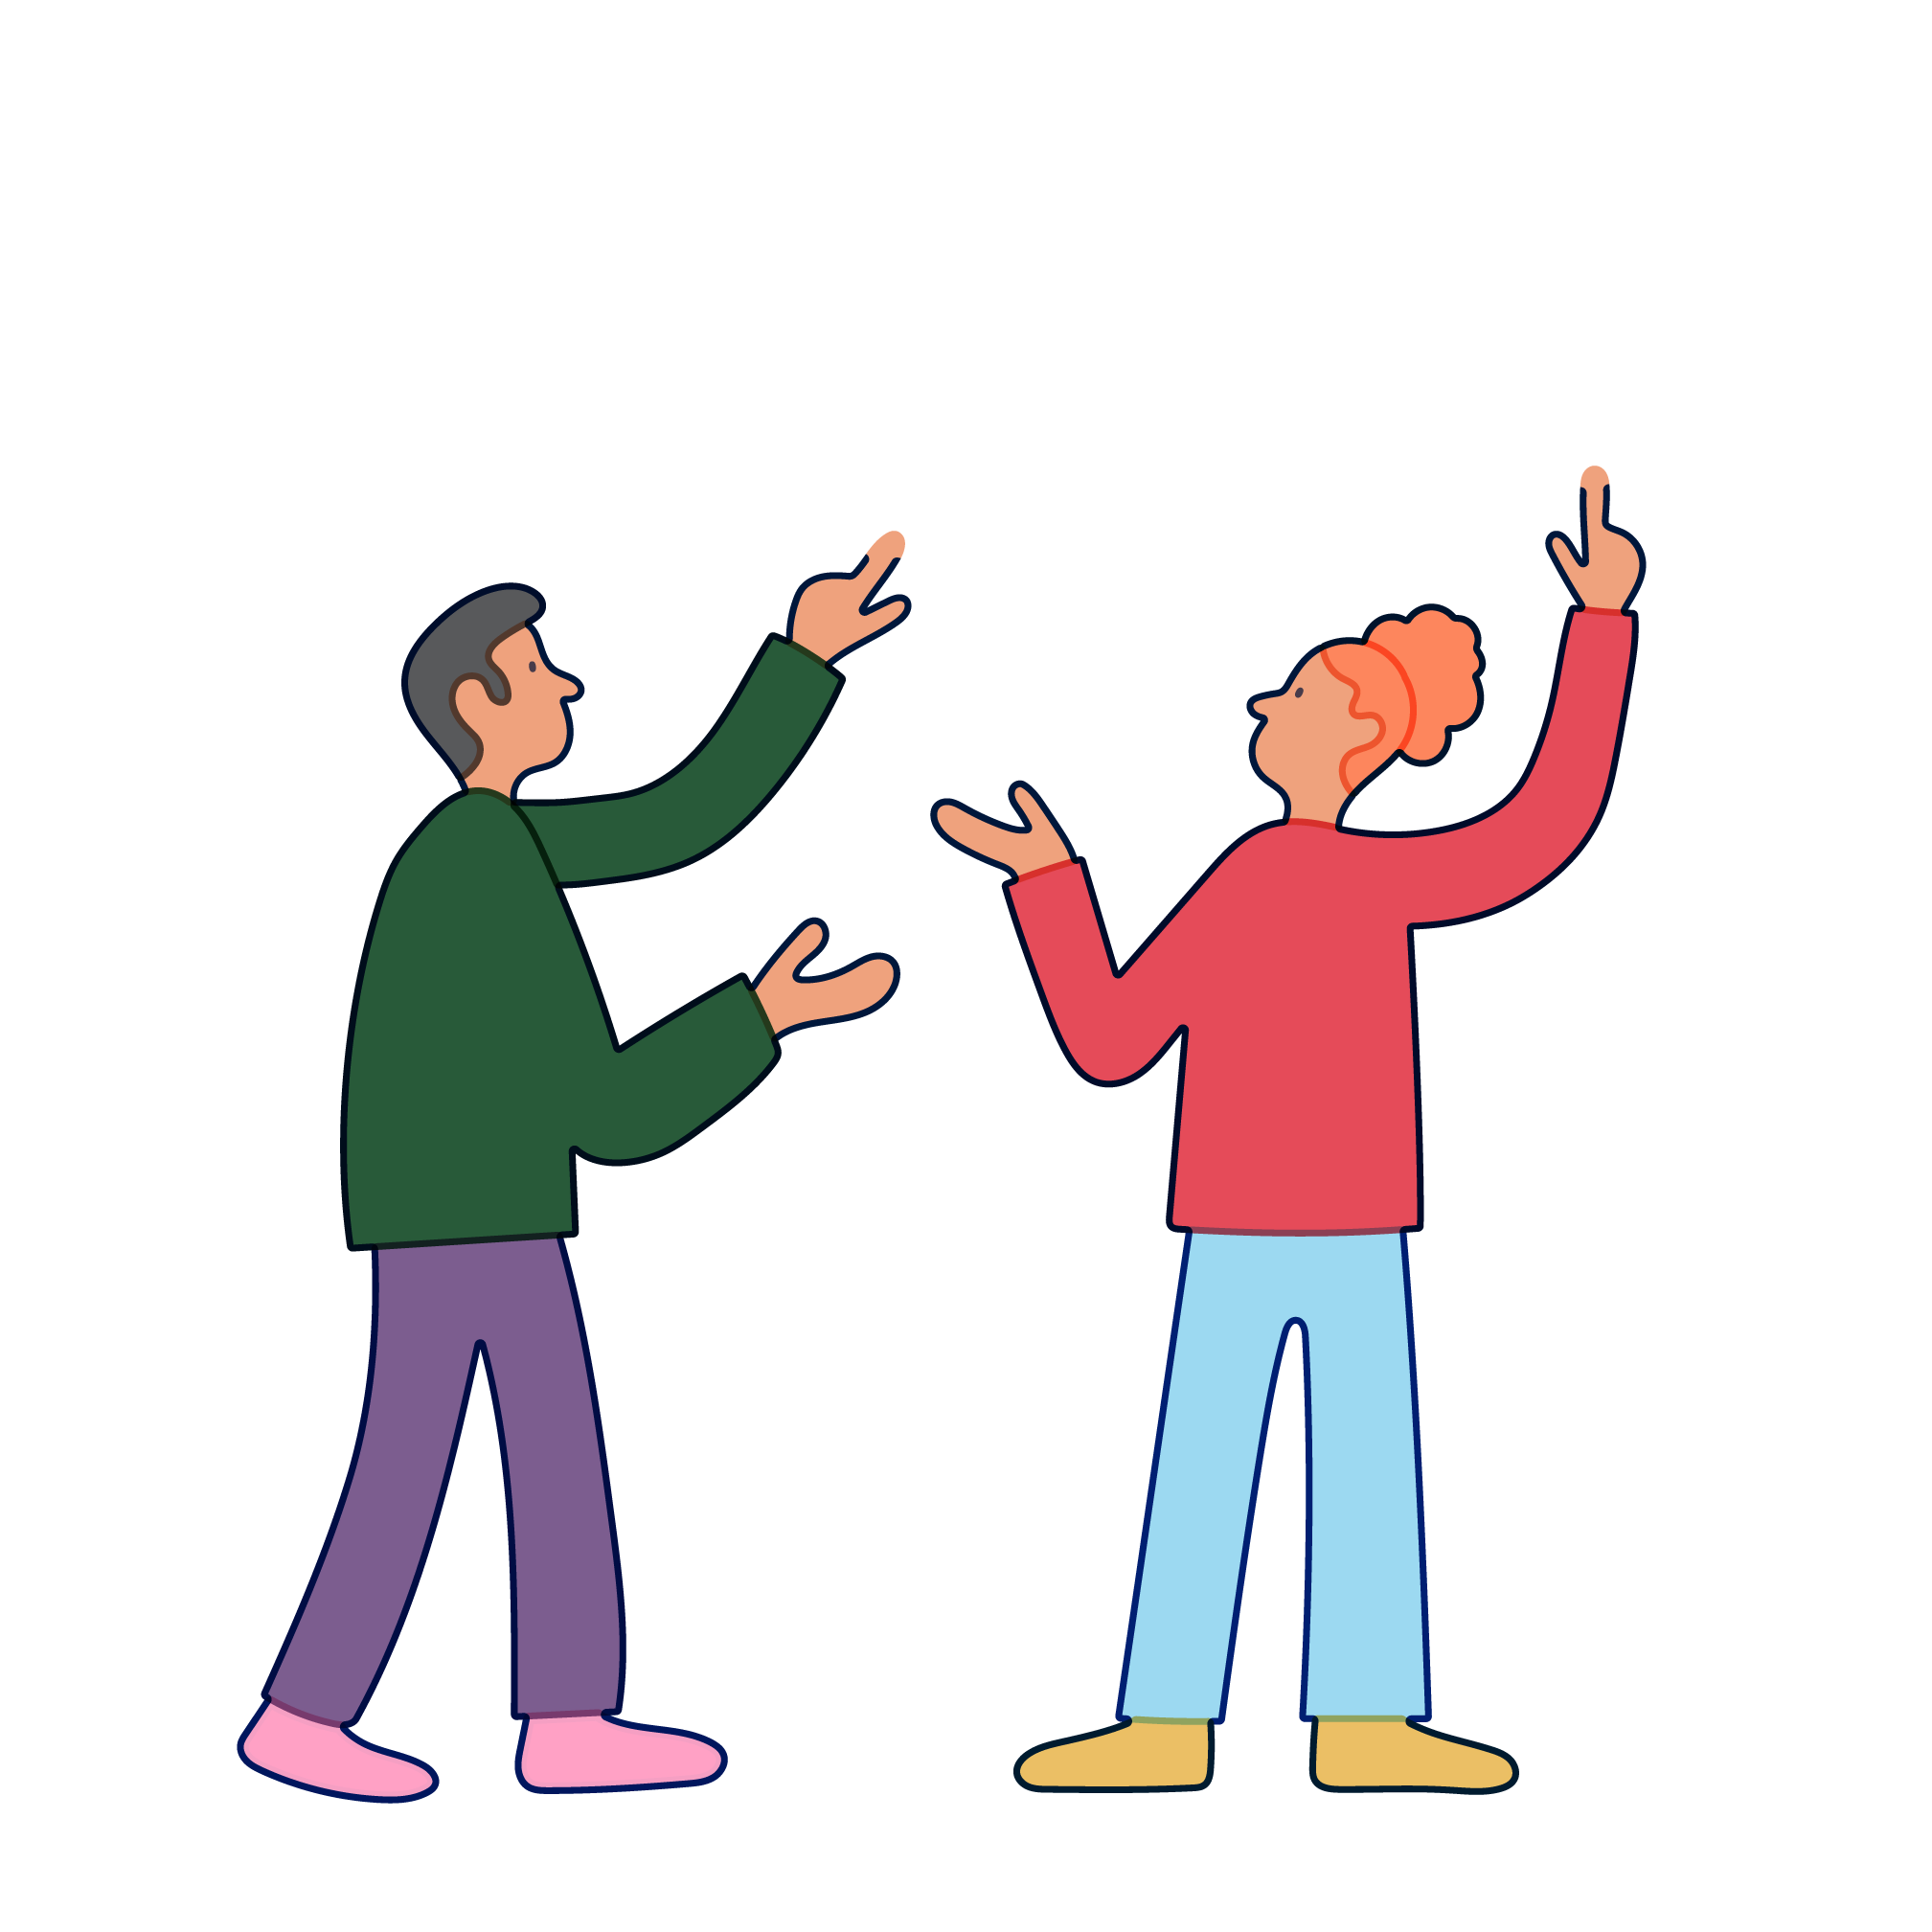 Two people chat animatedly with empty speech bubbles over their heads.